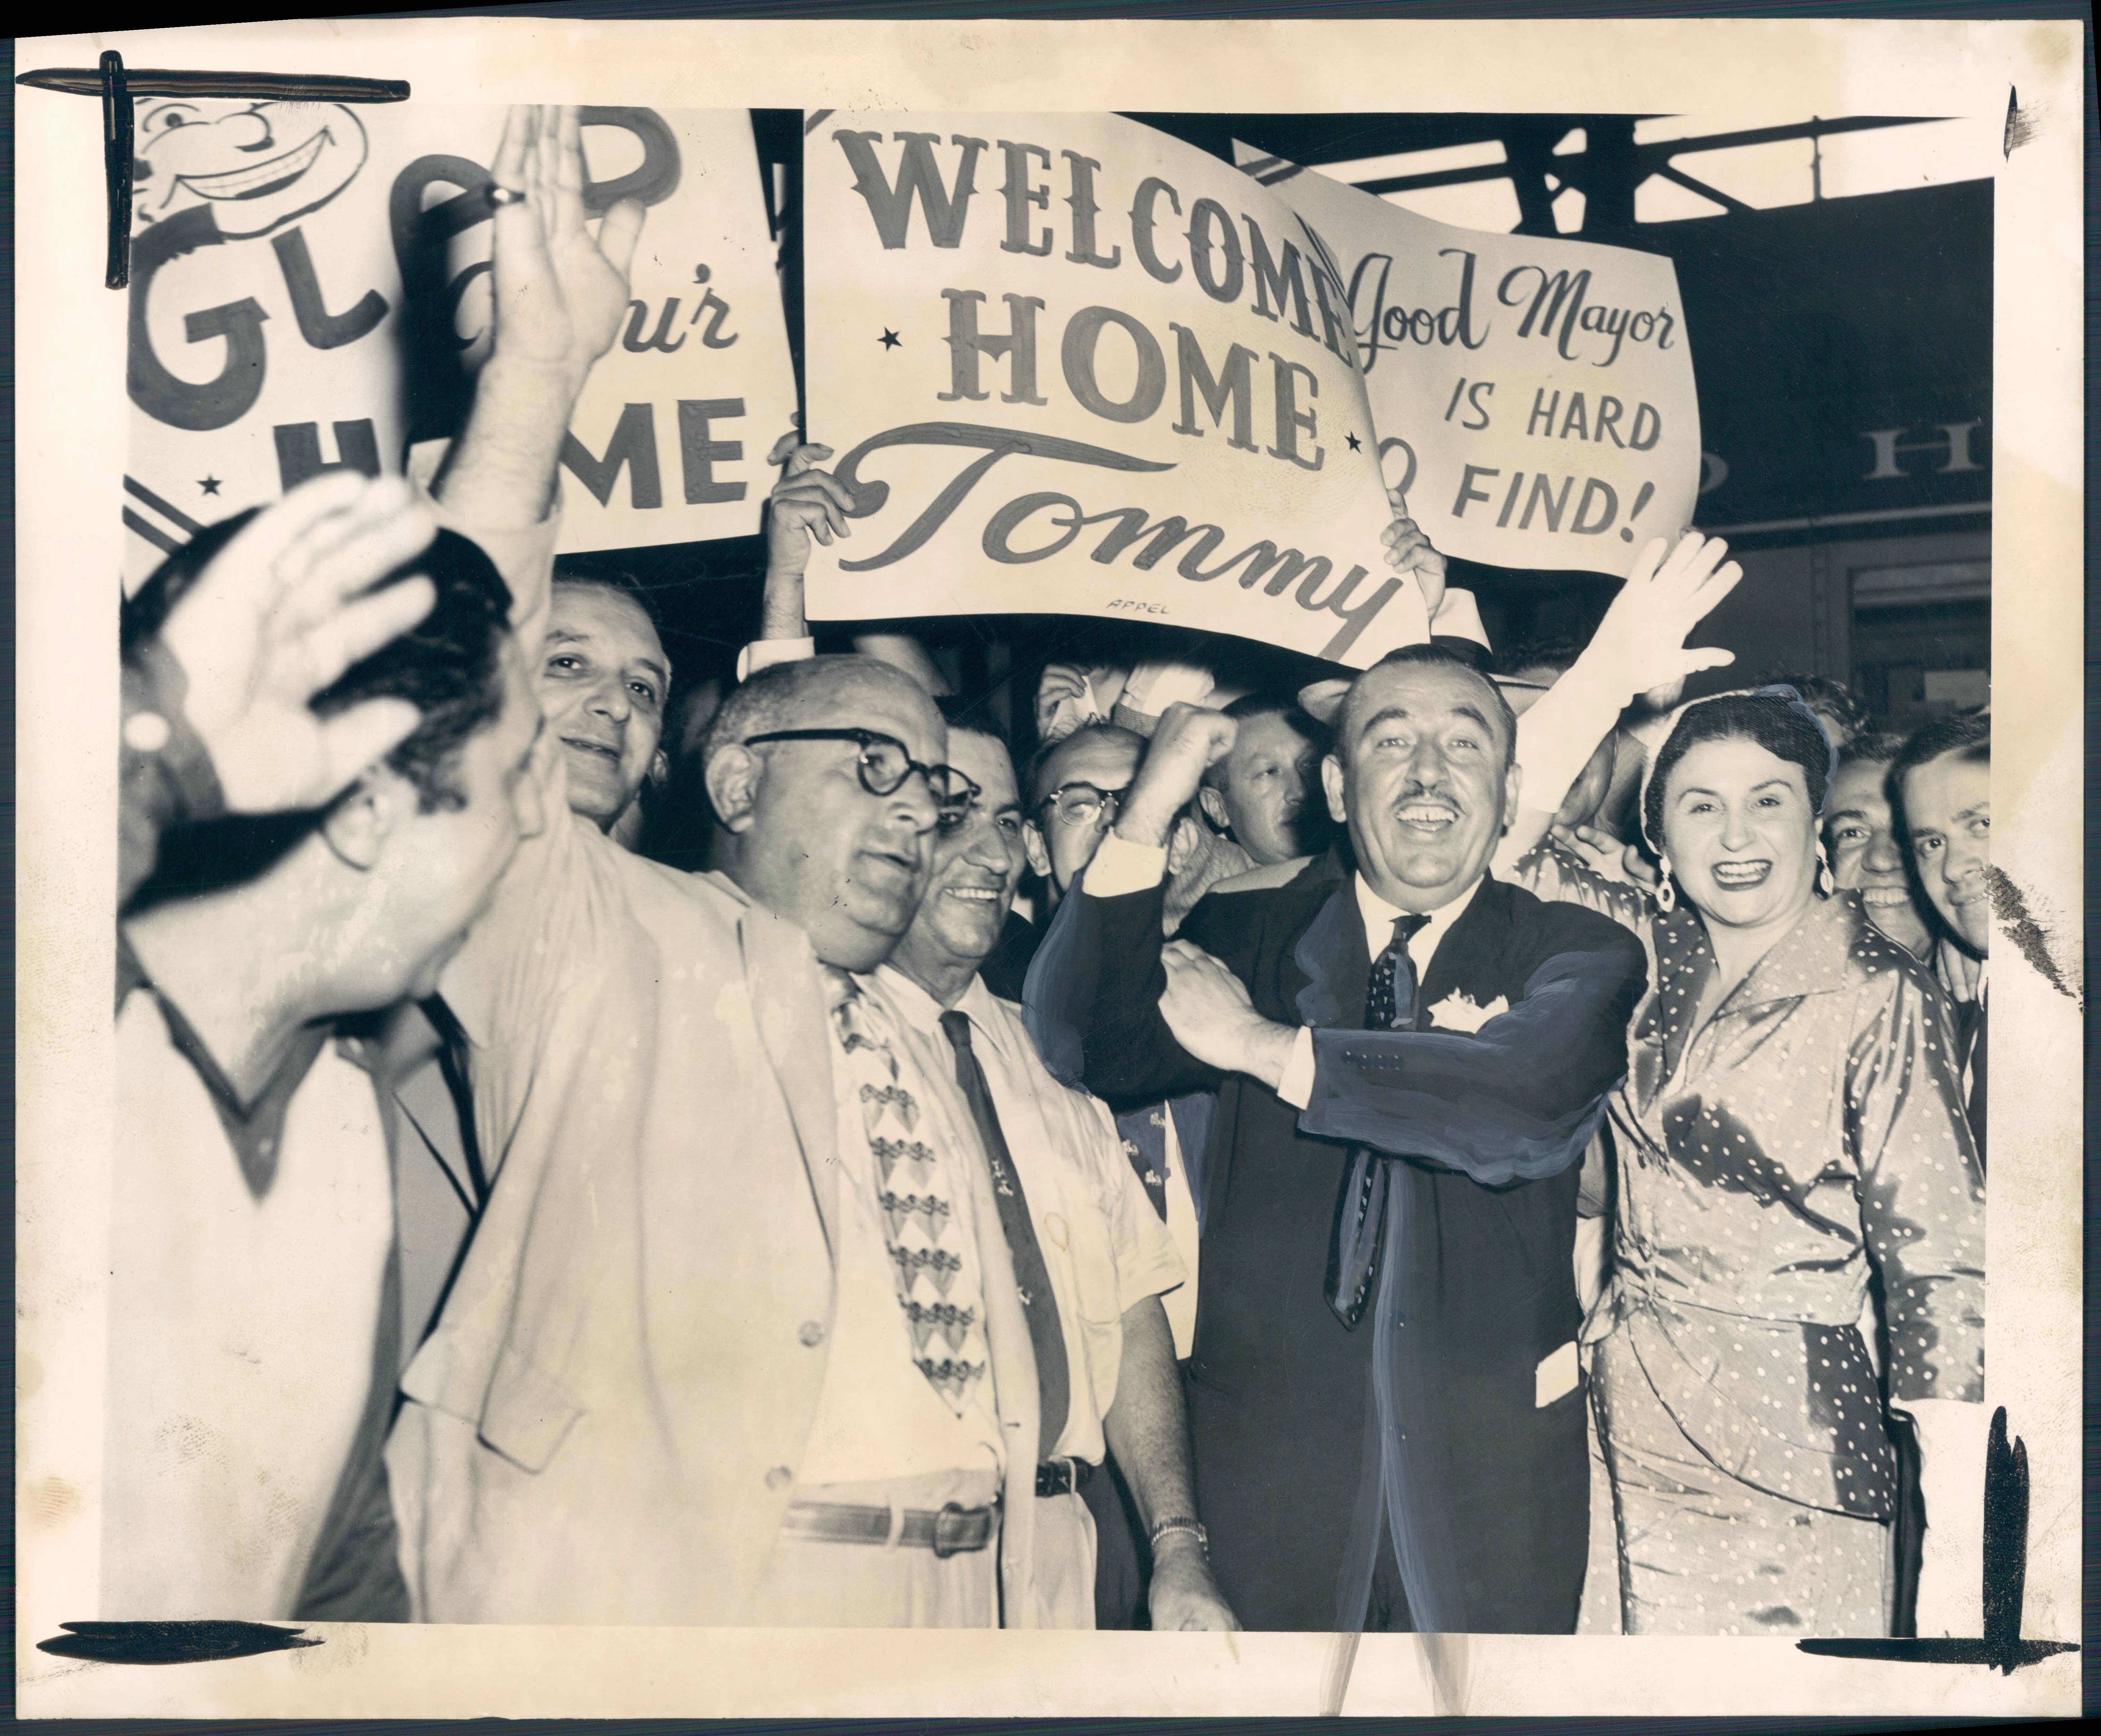 August 5, 1953 - Mayor Thomas D'Alesandro arrives home to a warm welcome. Photo by Walter M. McCardell ADY-522-BSDate Created: 1953-08-05 Copyright Notice: Baltimore Sun Folder Description: D'ALESANDRO, THOMAS (MAYOR) Folder Extended Description: D'ALESANDRO, THOMAS (MAYOR) EUROPE TRIPS Title: D'ALESANDRO, THOMAS (MAYOR) EUROPE TRIPS Subject: D'ALESANDRO, THOMAS (MAYOR)